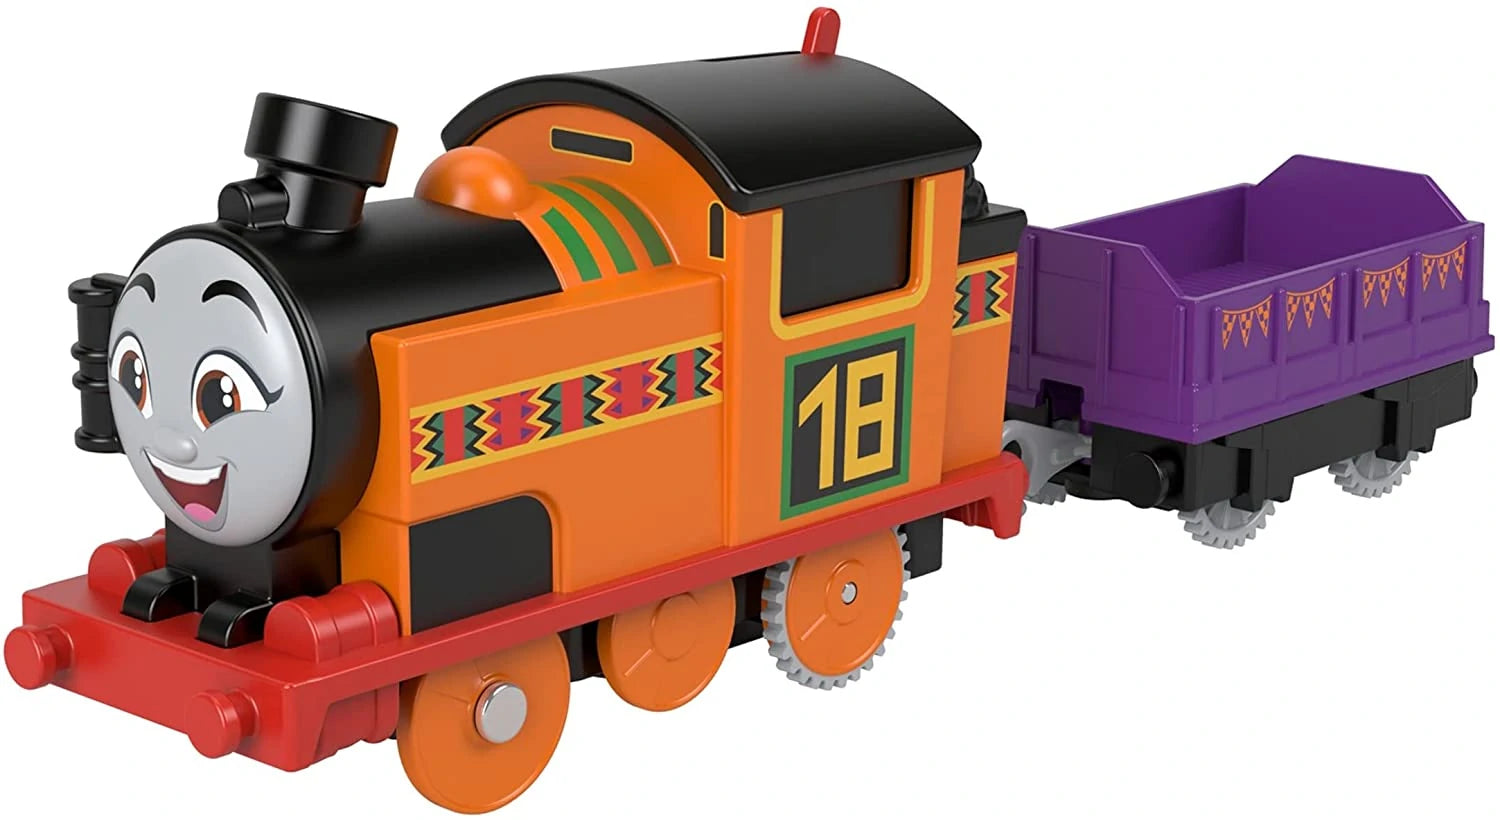 Thomas Motorized Nia requires 2 x AAA batteries